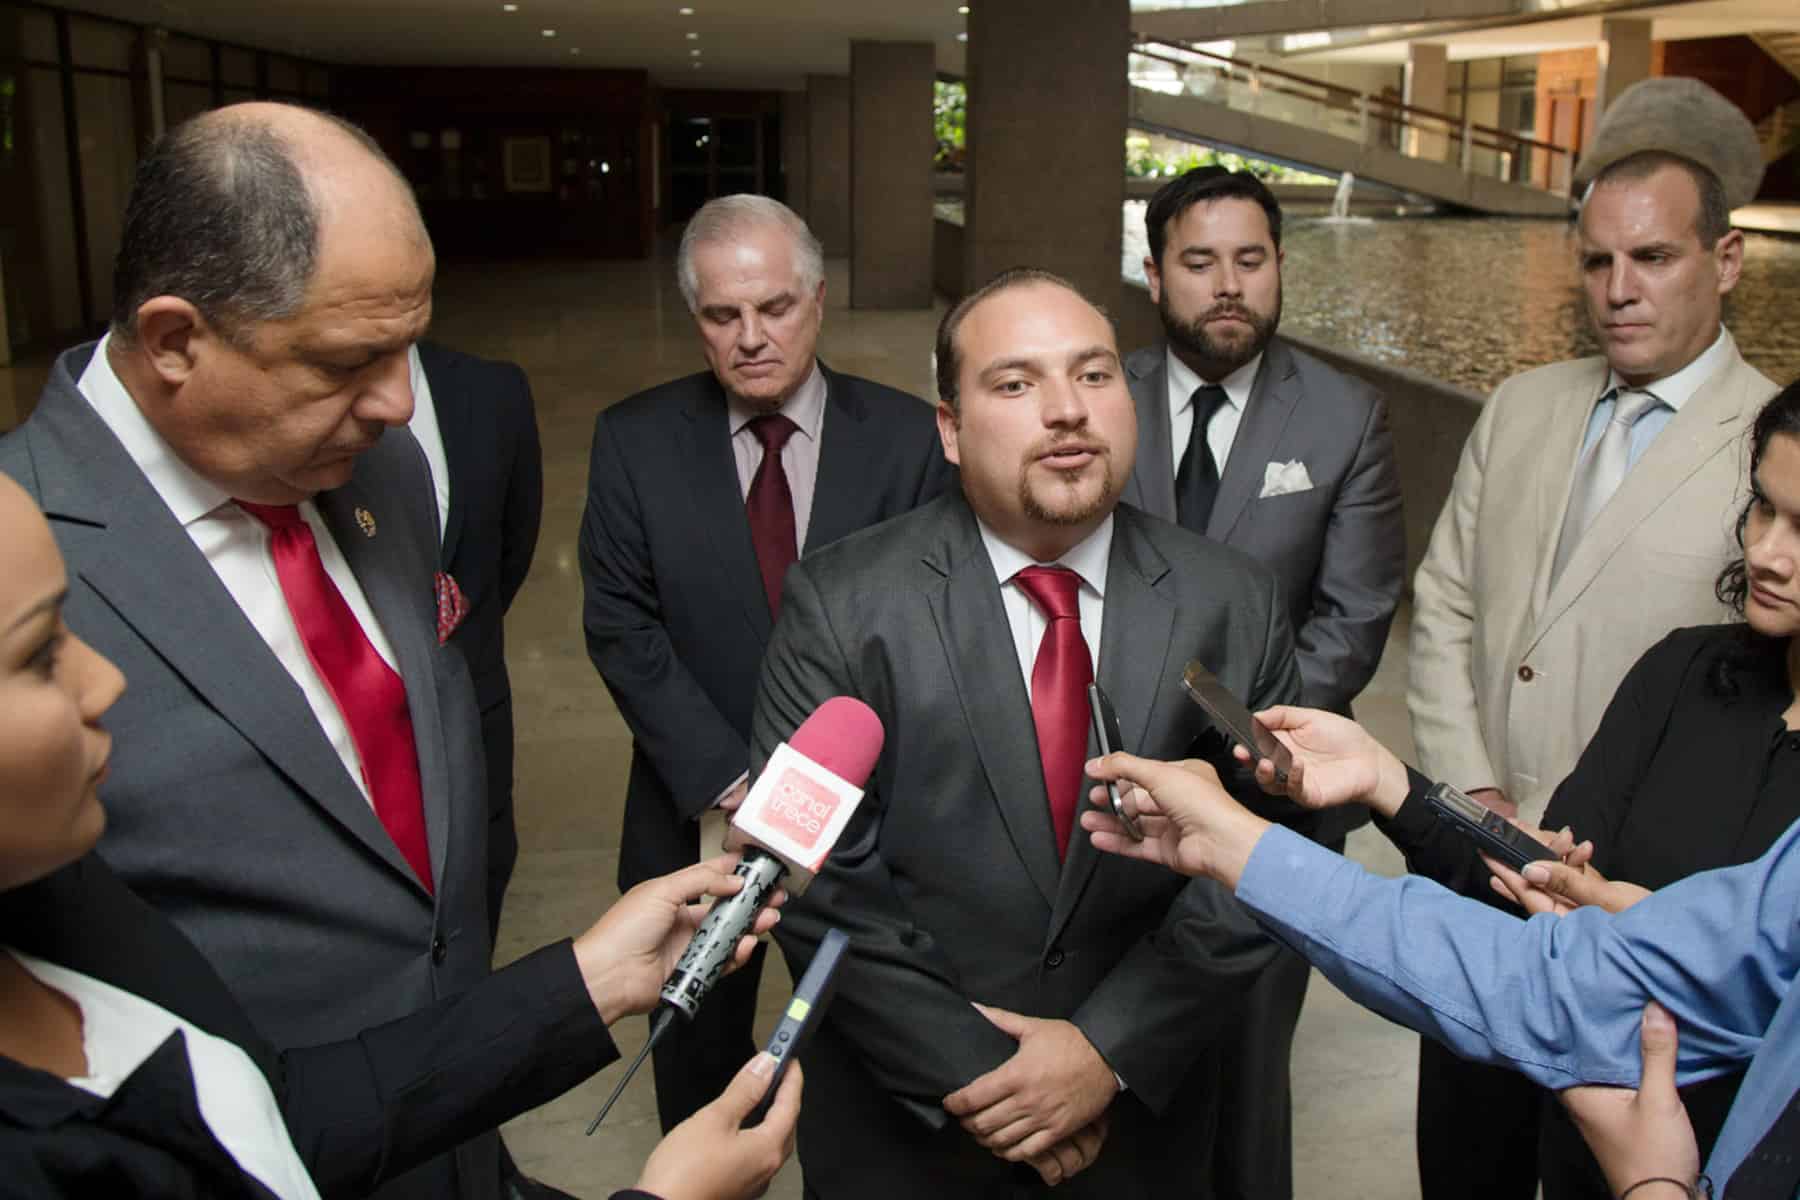 Costa Rica's President Luis Guillermo Solís (left) and CANATUR President Pablo Heriberto Araya after a meeting to discuss the needs of the tourism industry, March 25, 2015.